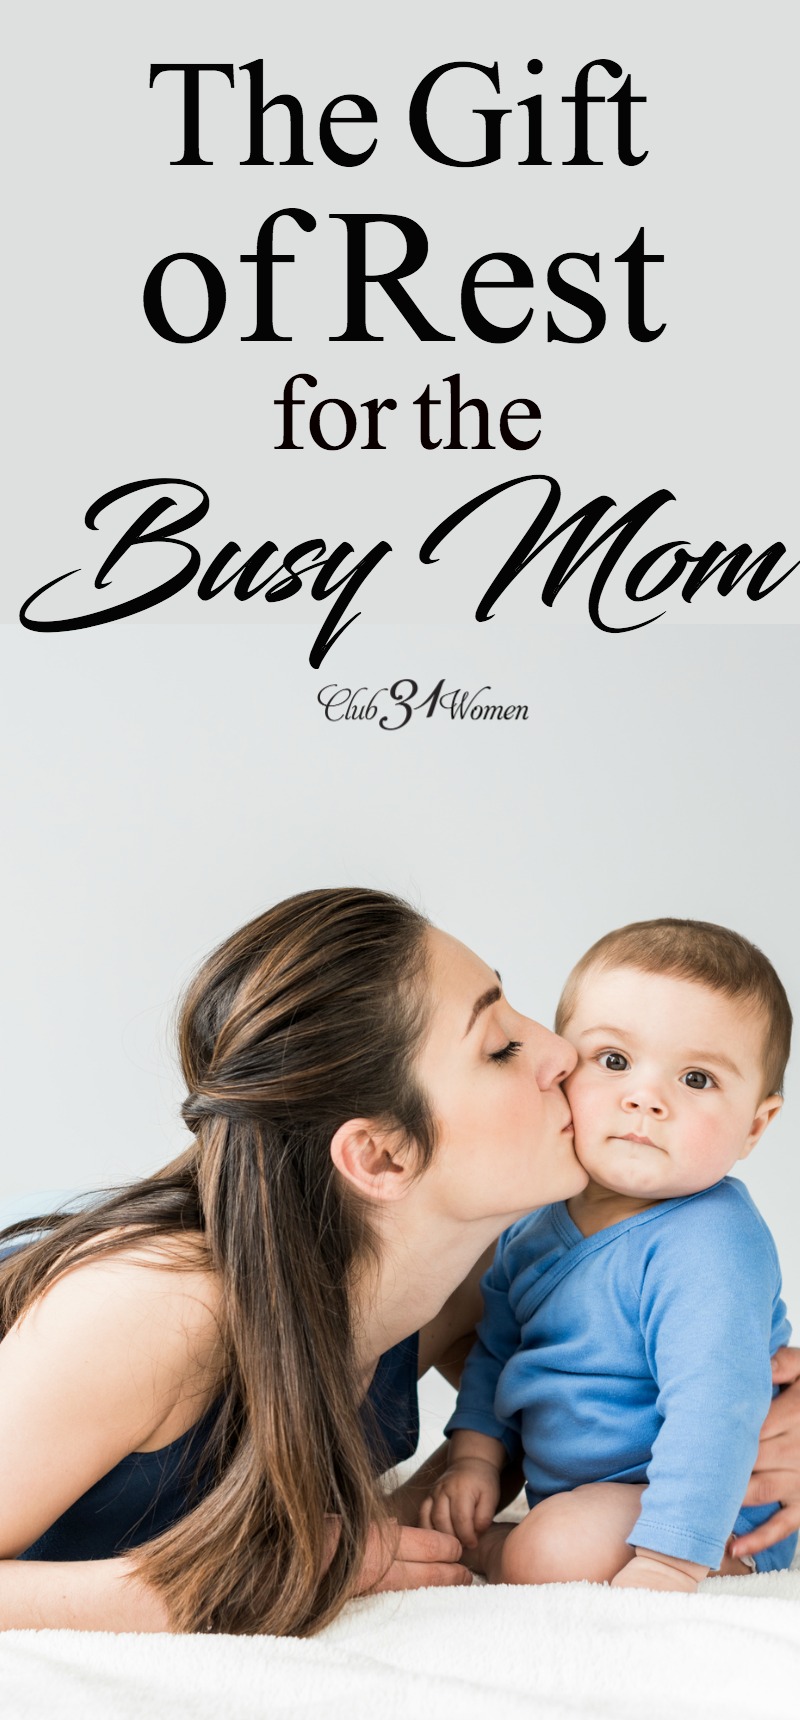 As a busy mom, making time for rest is low on our priority list. But I don't think we realize just how vital our own rest is to be strong moms. via @Club31Women